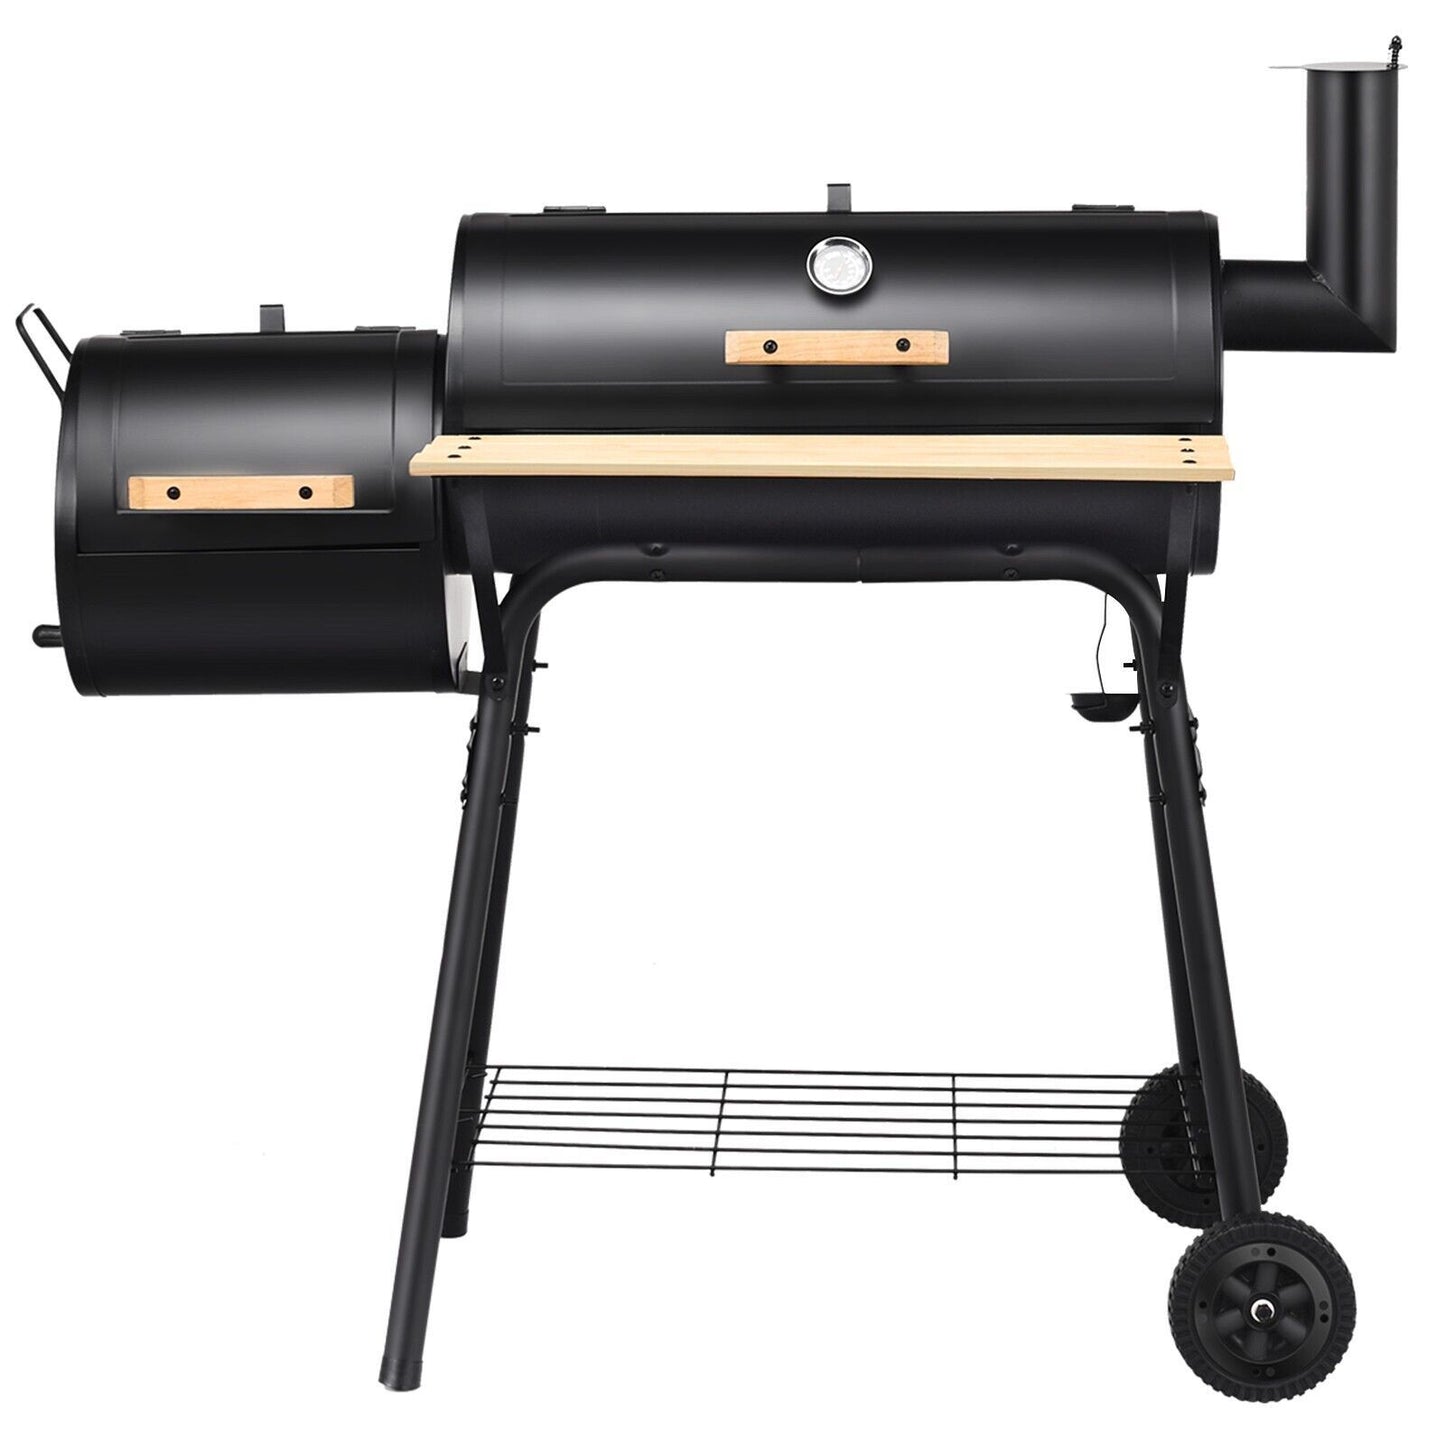 Charcoal BBQ Grill with Wheels and Shelves for Camping Picnic Party